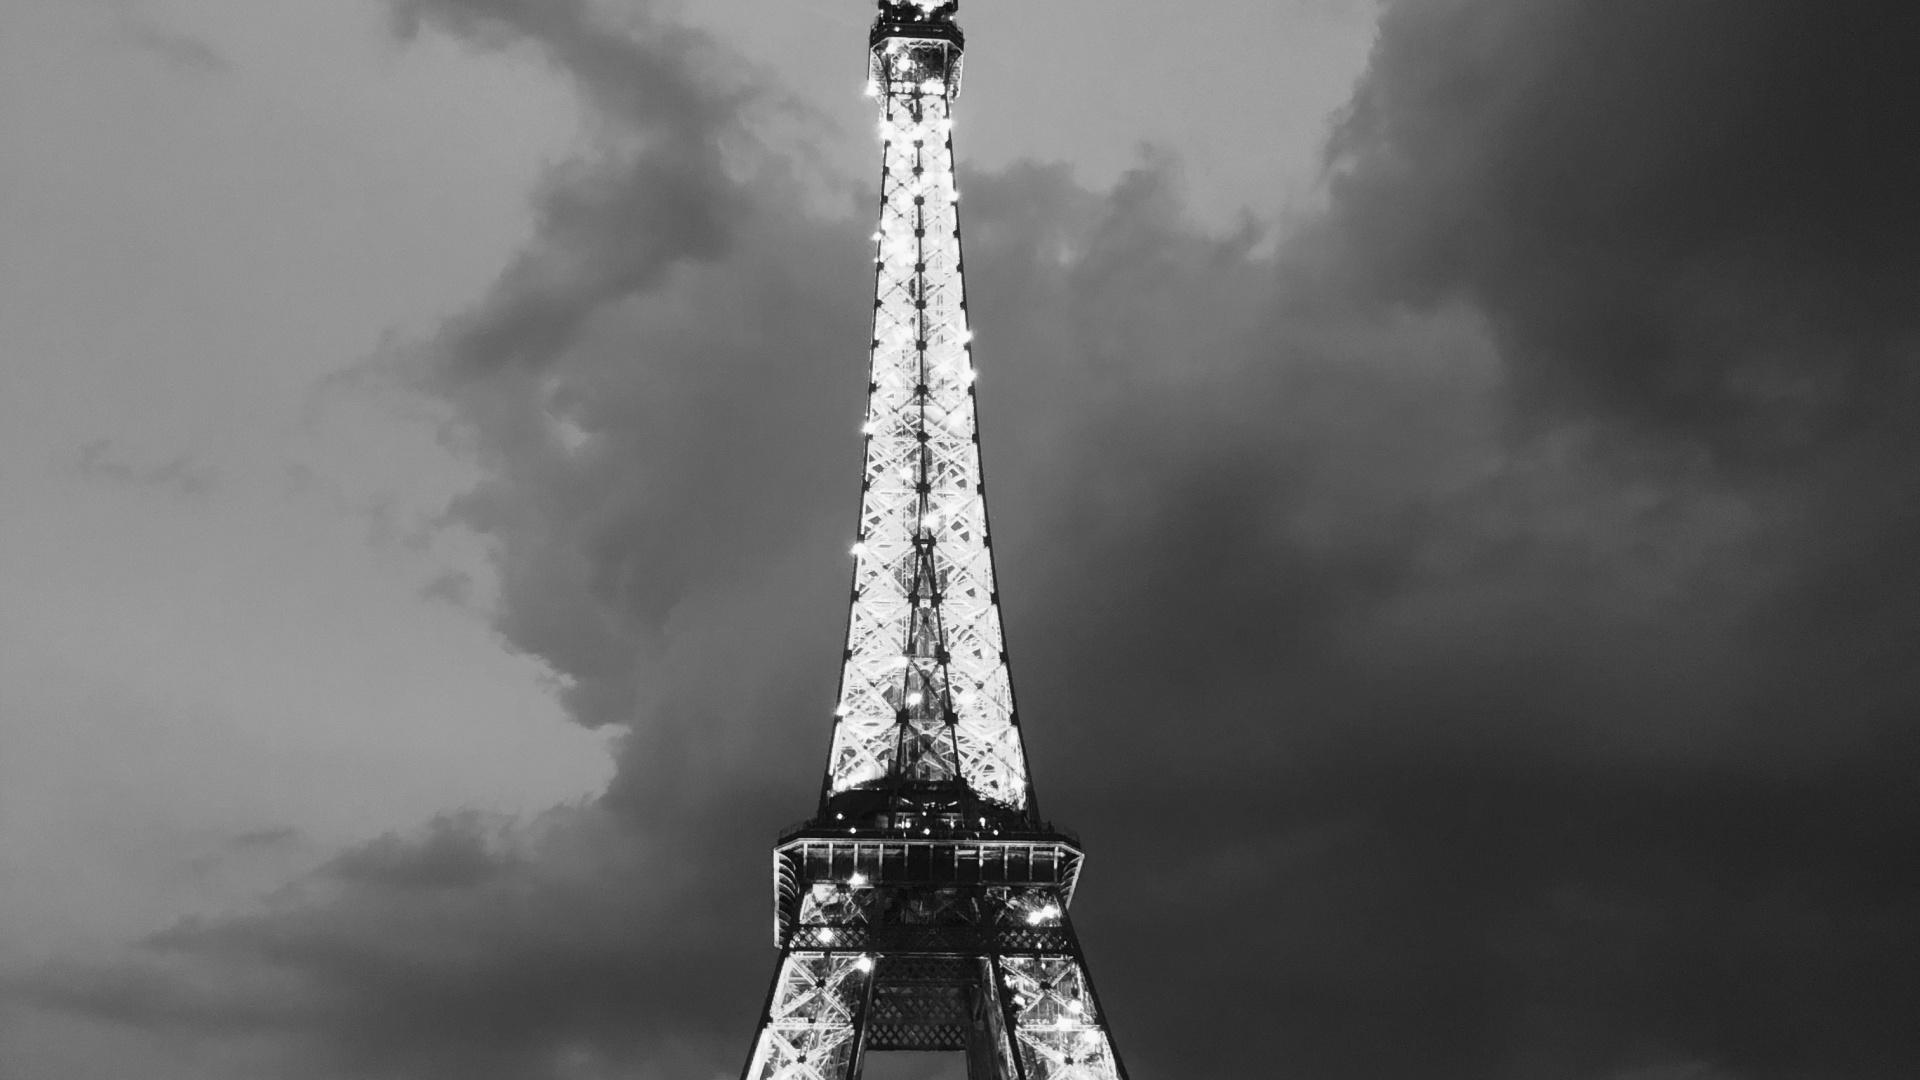 Eiffel Tower, Black and White, Tower, Cloud, Atmosphere. Wallpaper in 1920x1080 Resolution